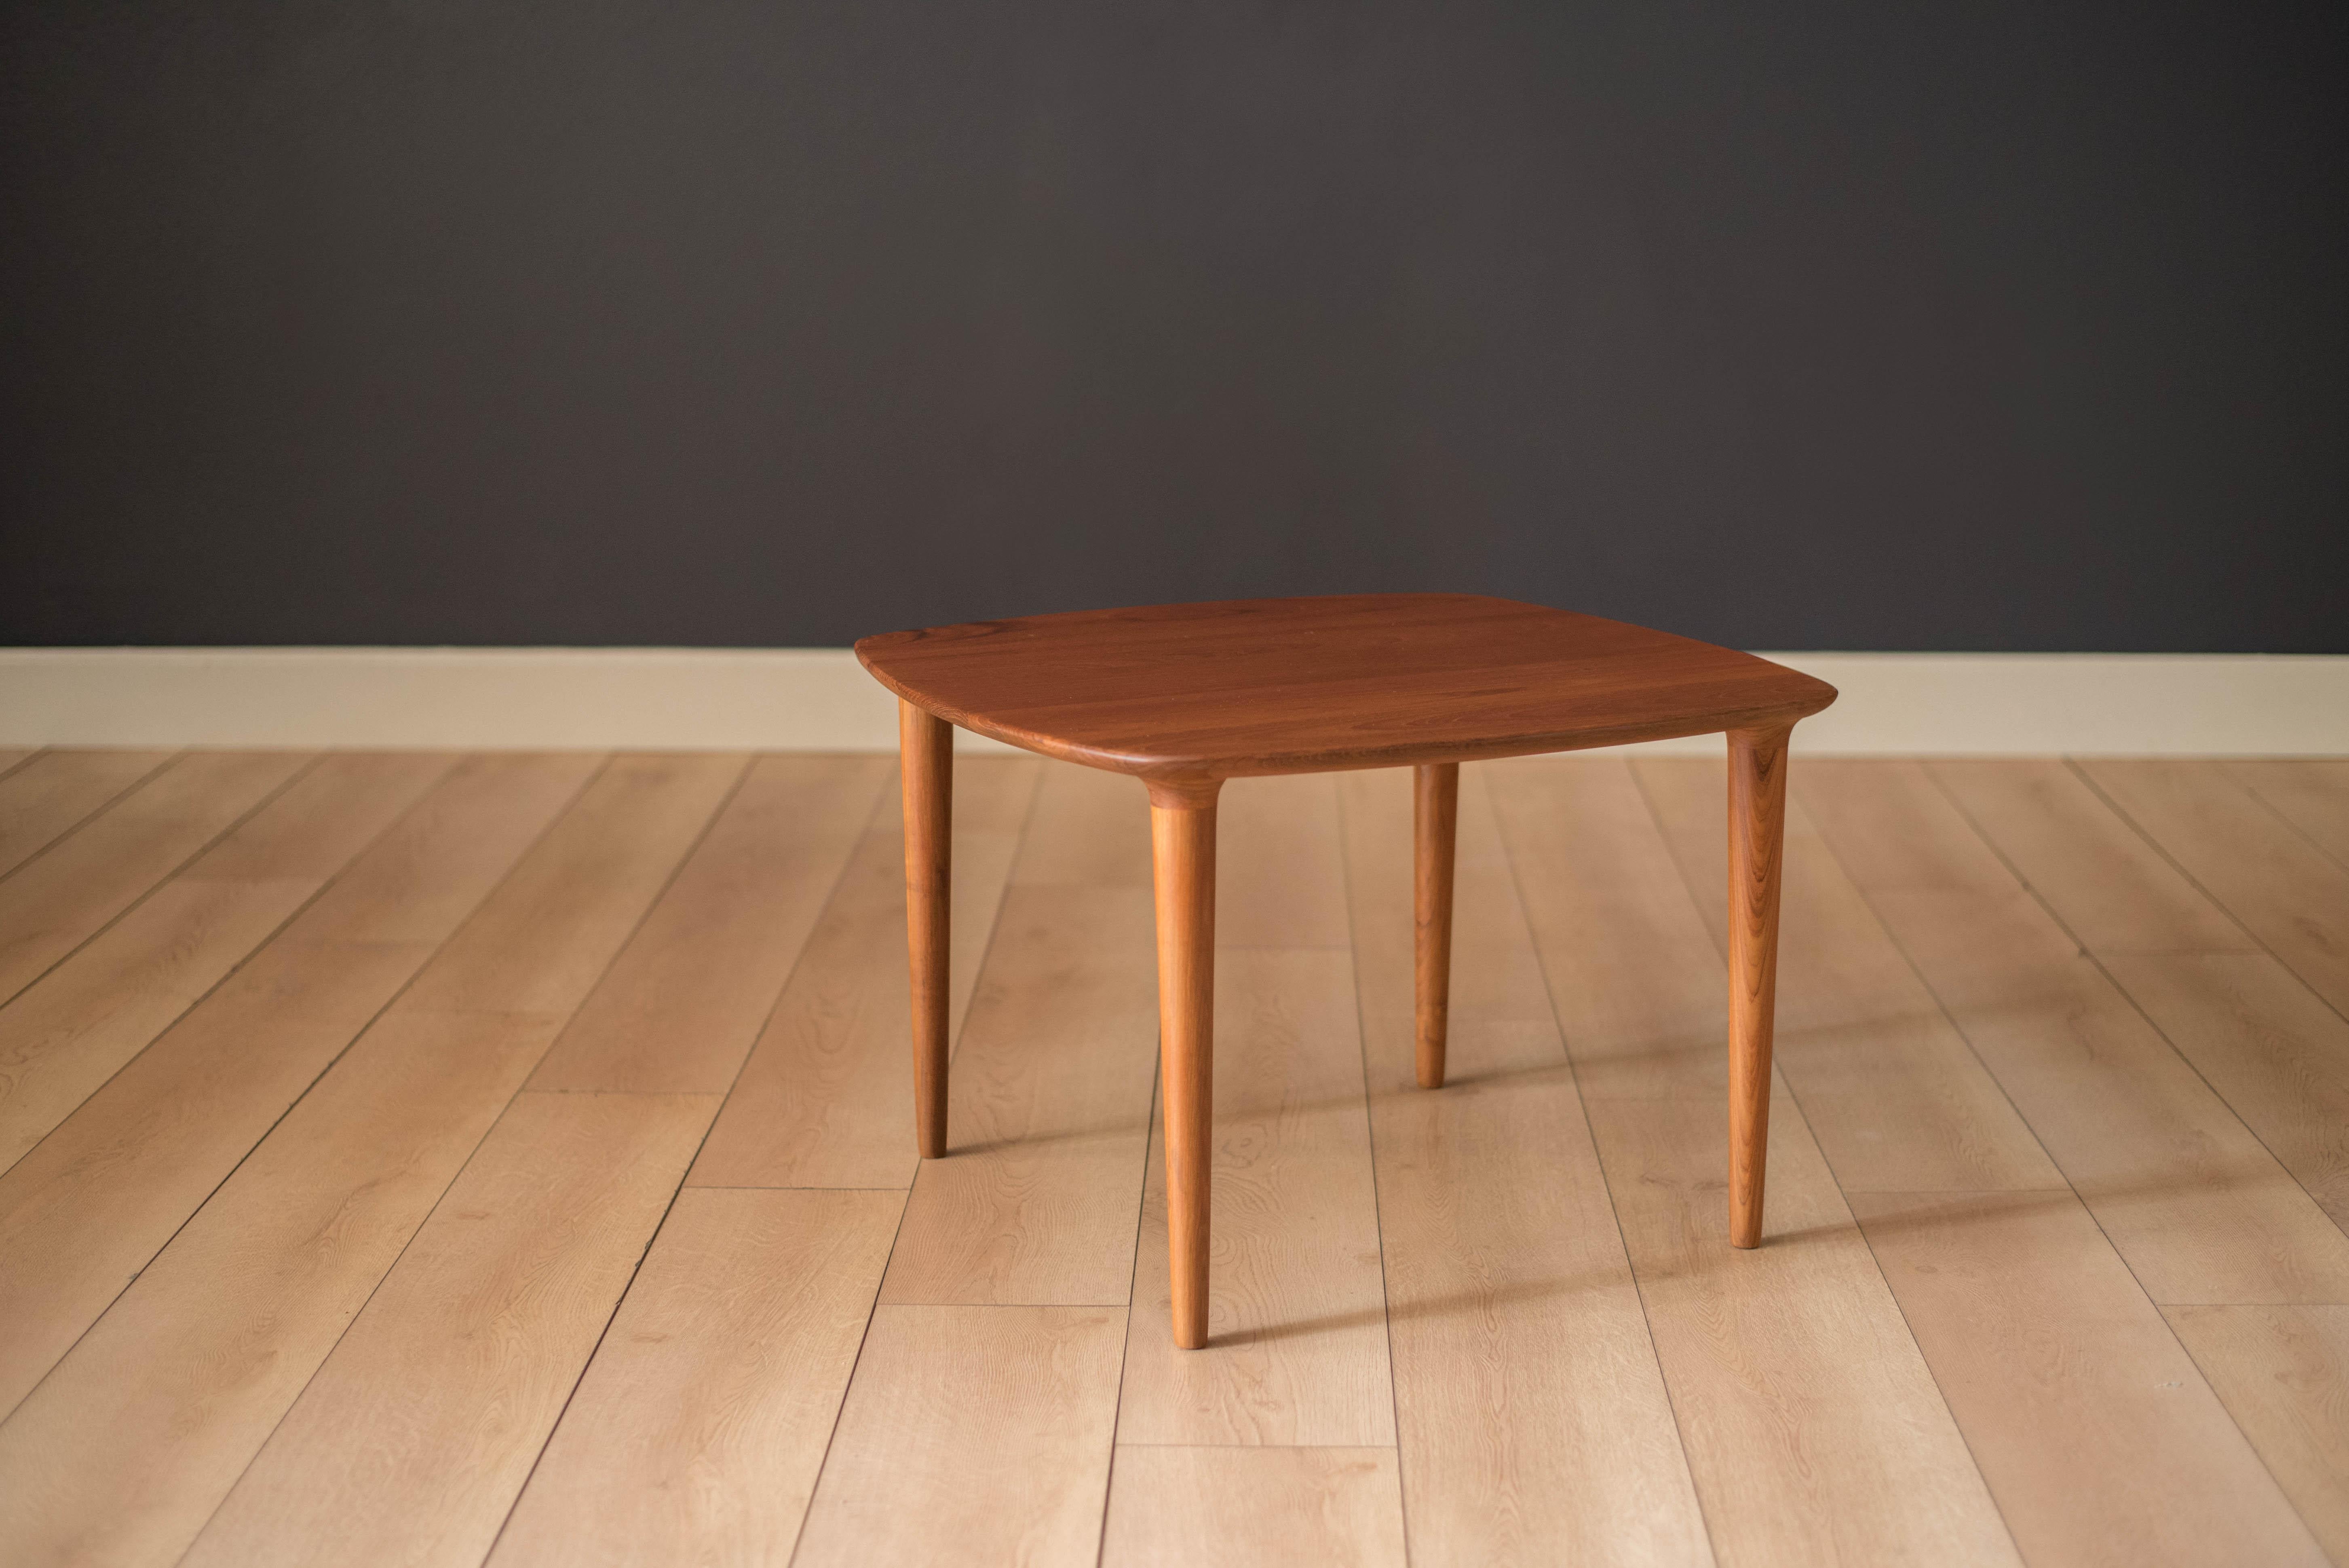 Mid-Century Modern side table manufactured by Gustav Bahus, Norway. This piece is constructed of solid planked teak featuring rounded edges and sculpted legs. Perfect to use as an end table or coffee table.